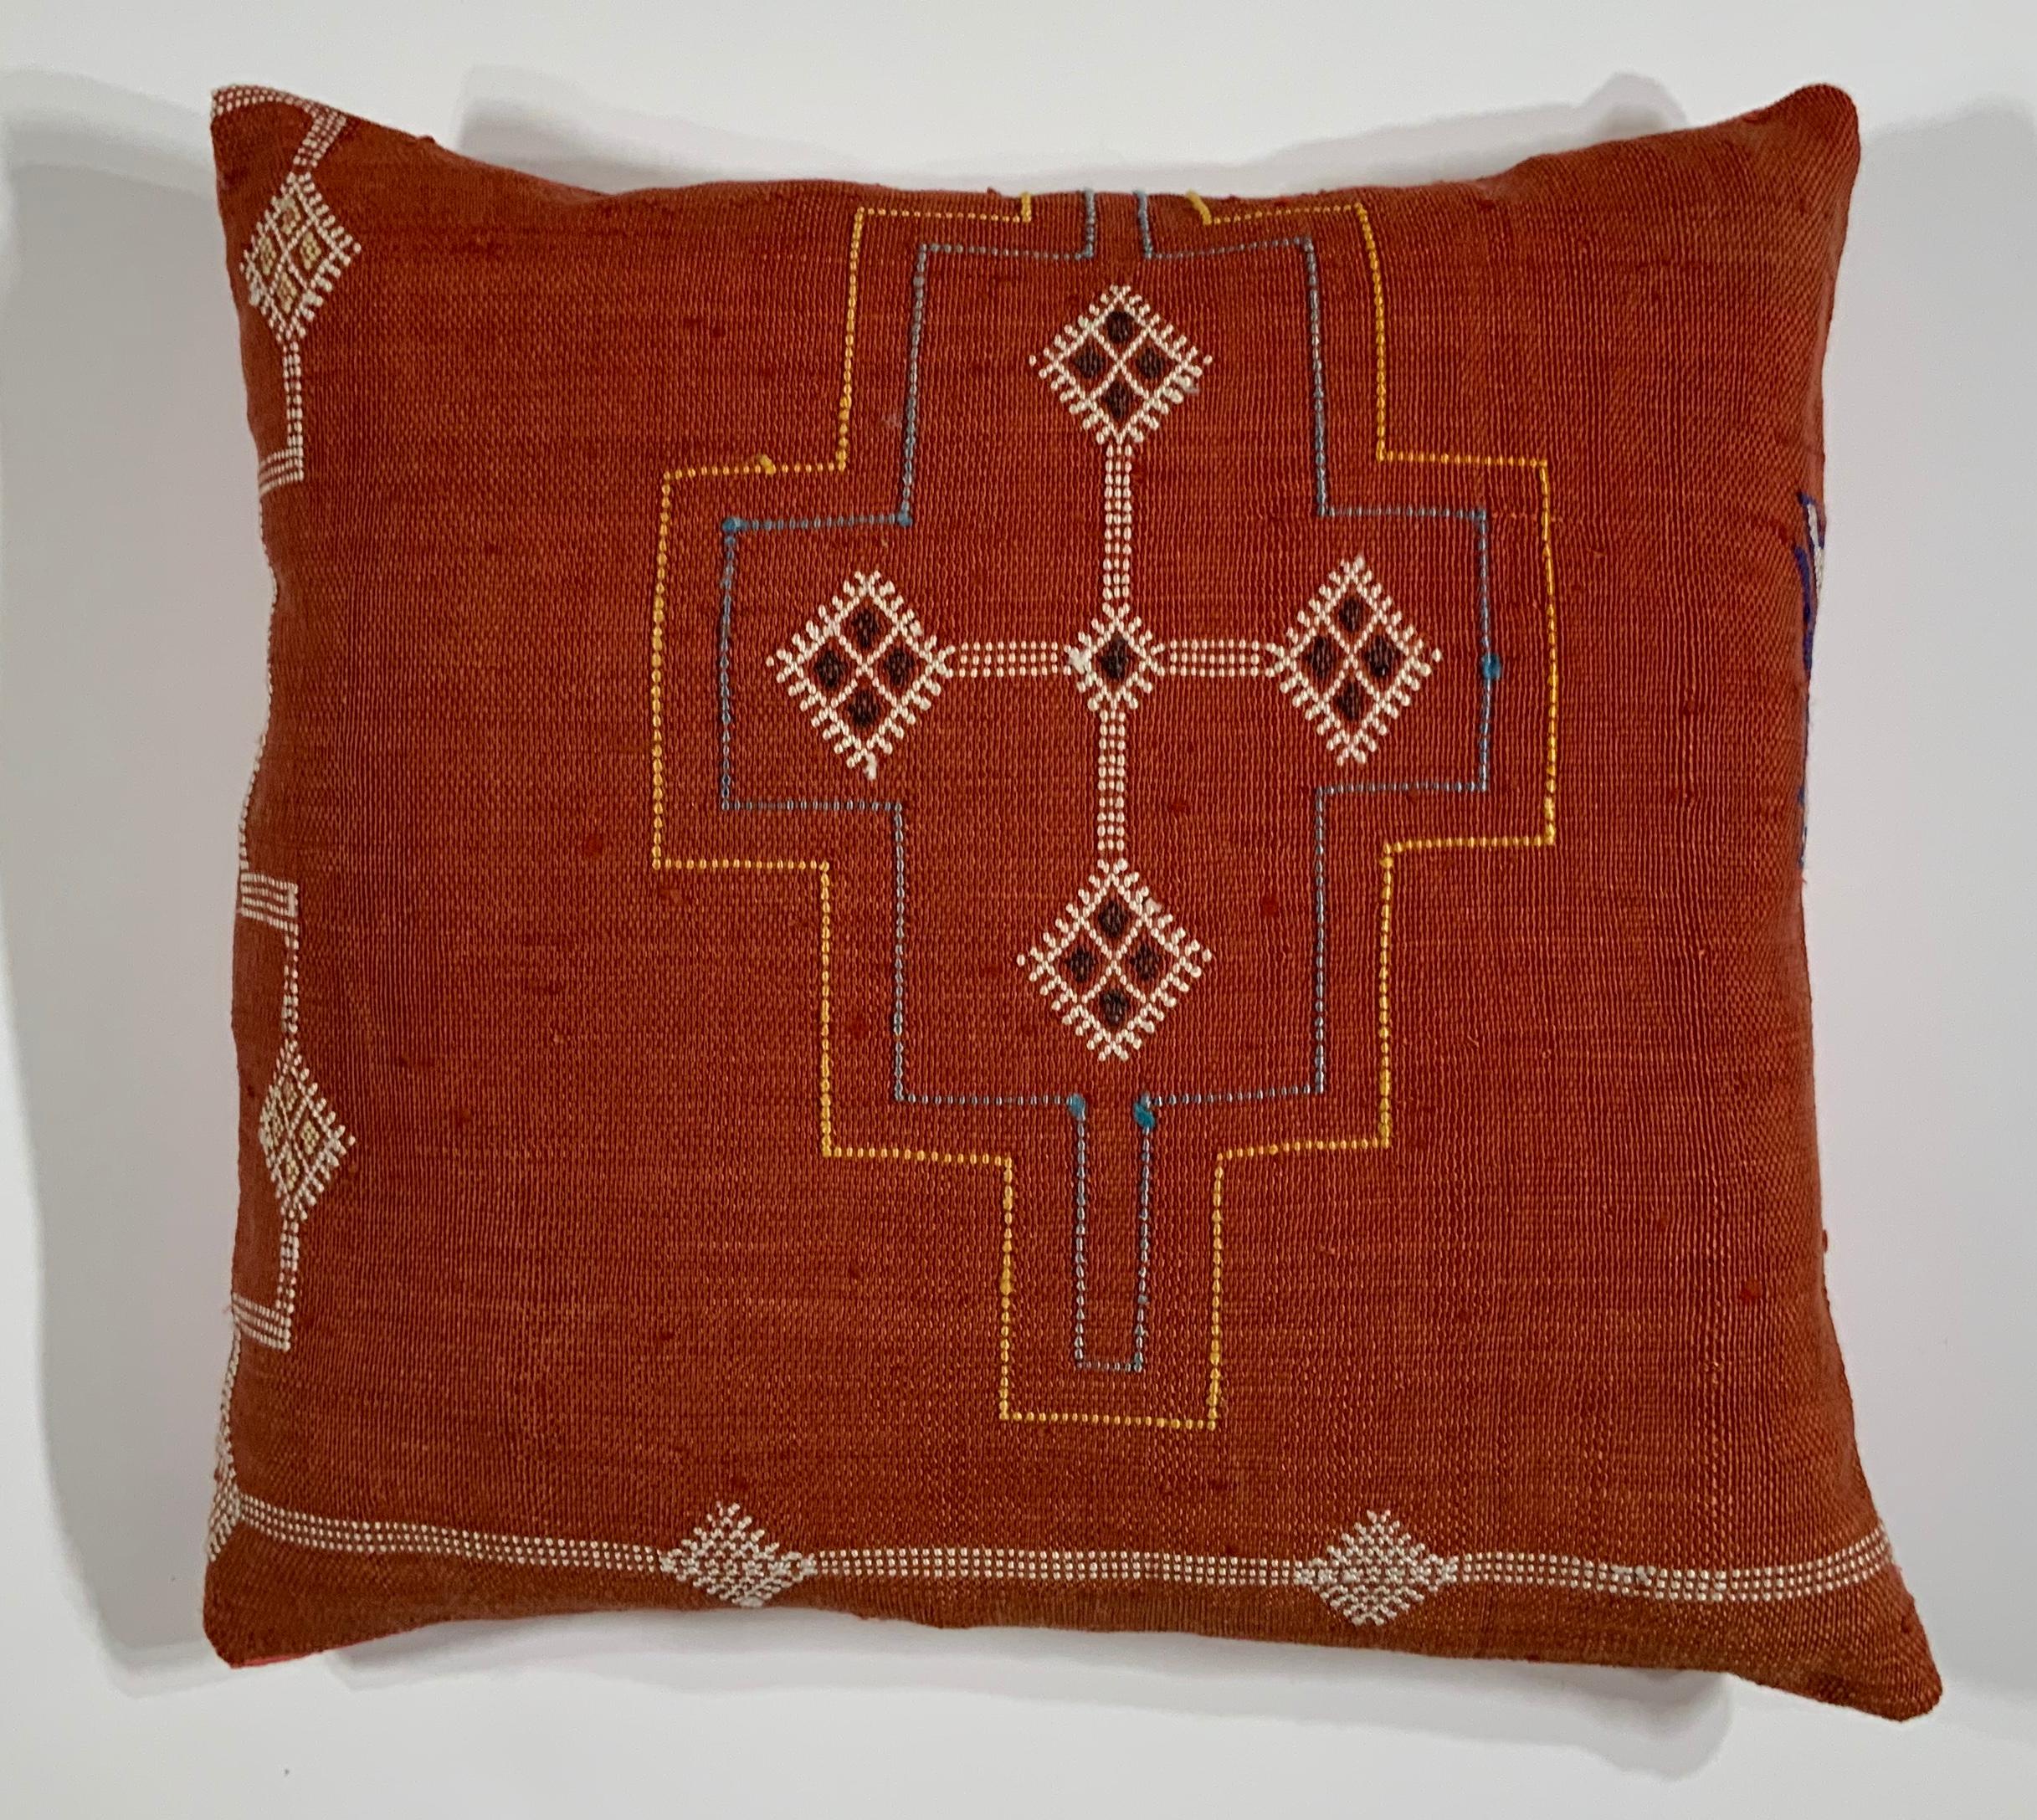 Beautiful pillow made of handwoven flat-weave textile with multi colors geometric motifs on a red background, fine silk backing, fresh new insert.